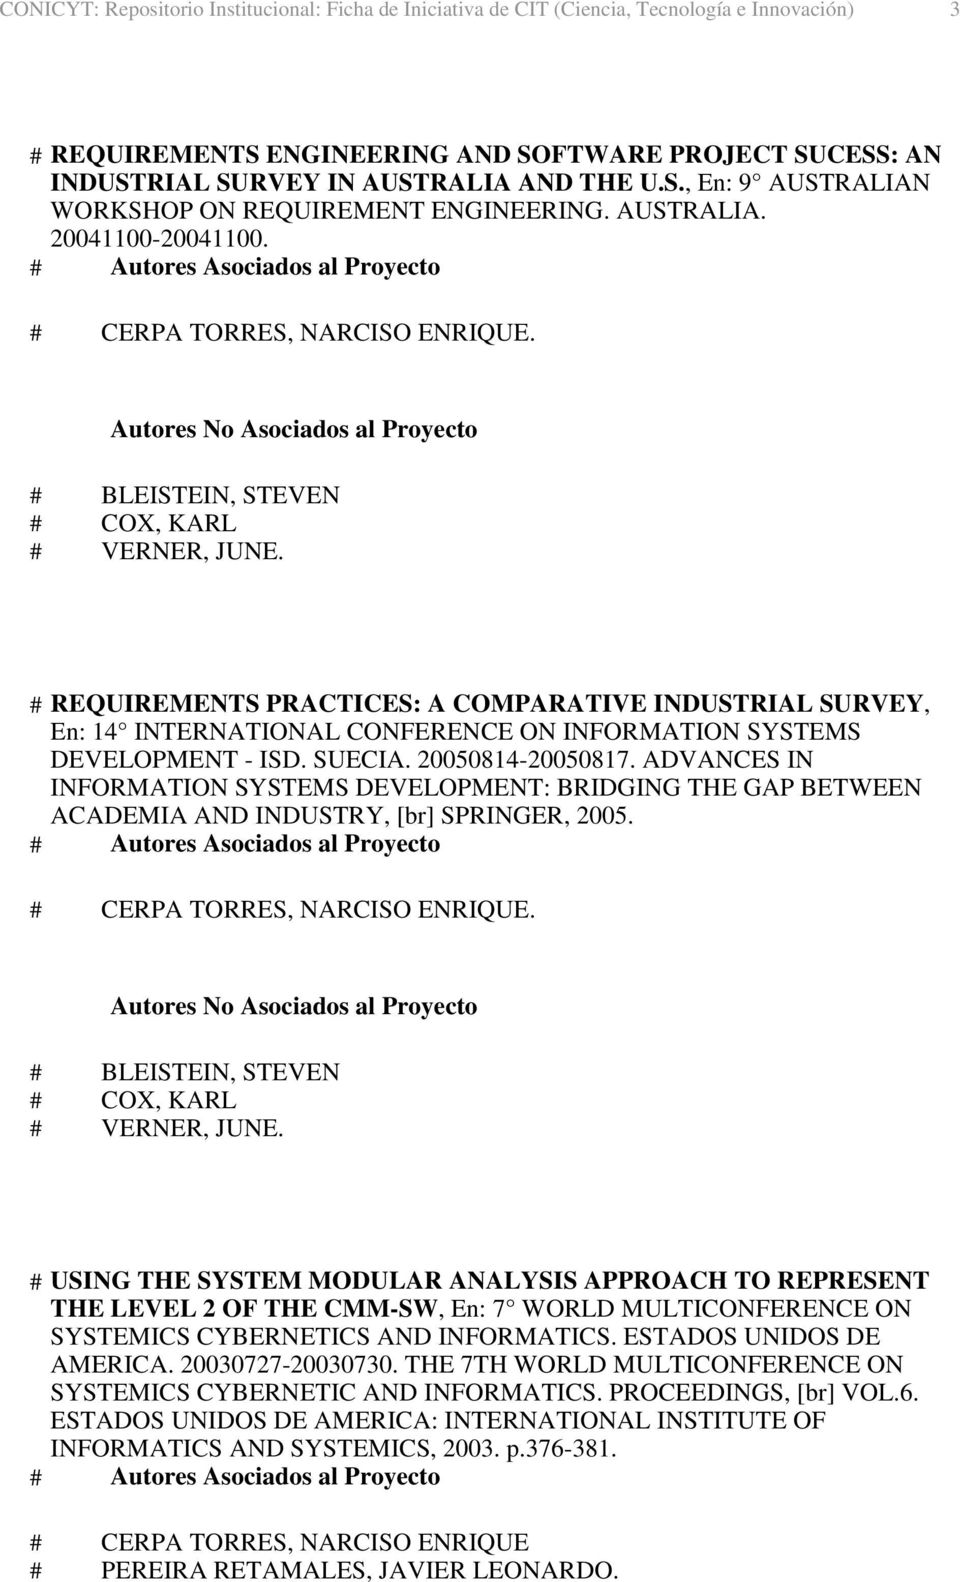 # REQUIREMENTS PRACTICES: A COMPARATIVE INDUSTRIAL SURVEY, En: 14 INTERNATIONAL CONFERENCE ON INFORMATION SYSTEMS DEVELOPMENT - ISD. SUECIA. 20050814-20050817.